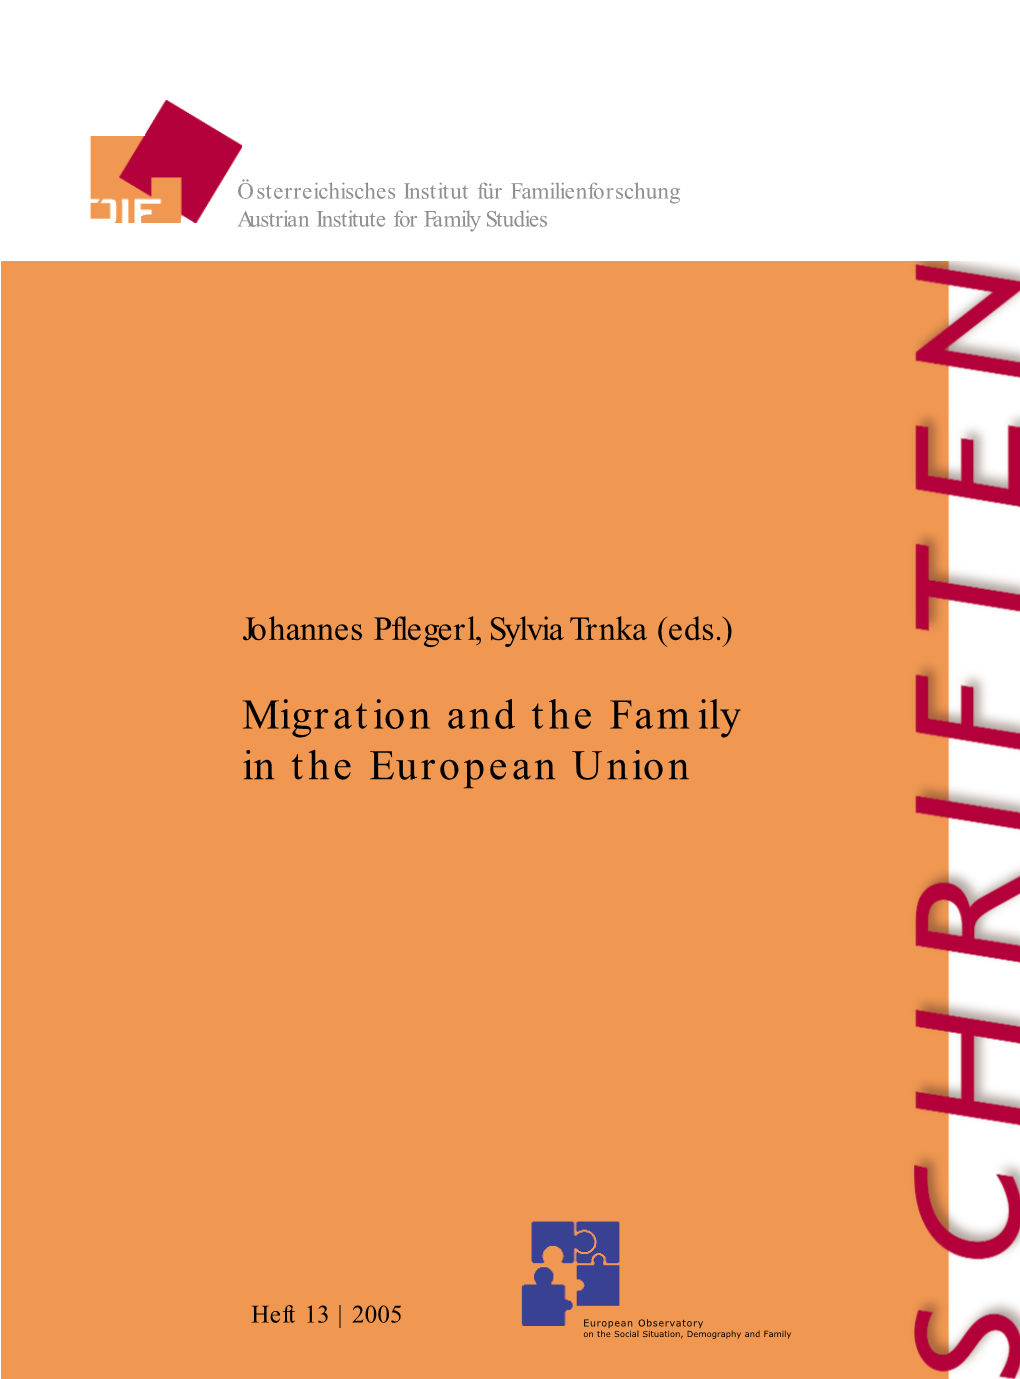 Migration and the Family in the European Union